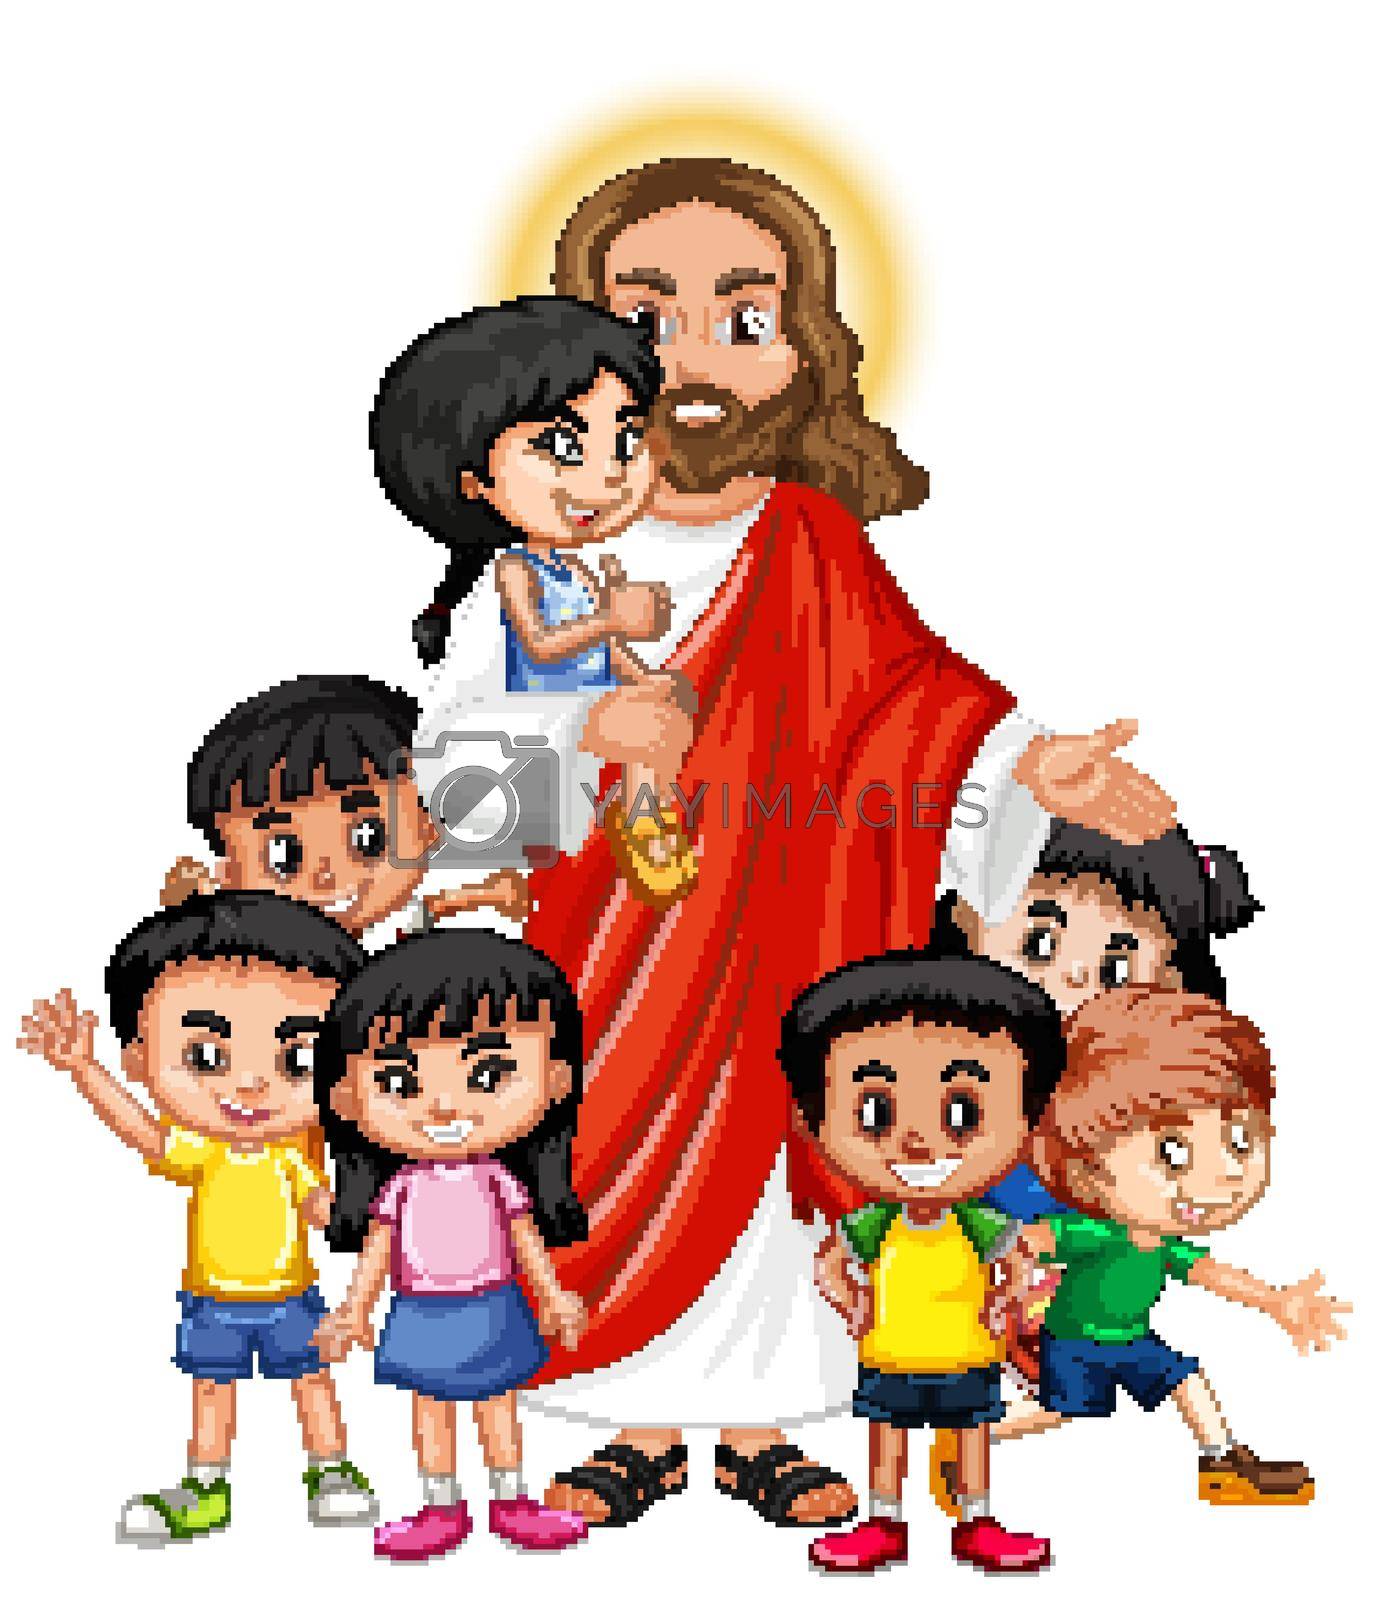 Royalty free image of Jesus with a children group cartoon character by iimages